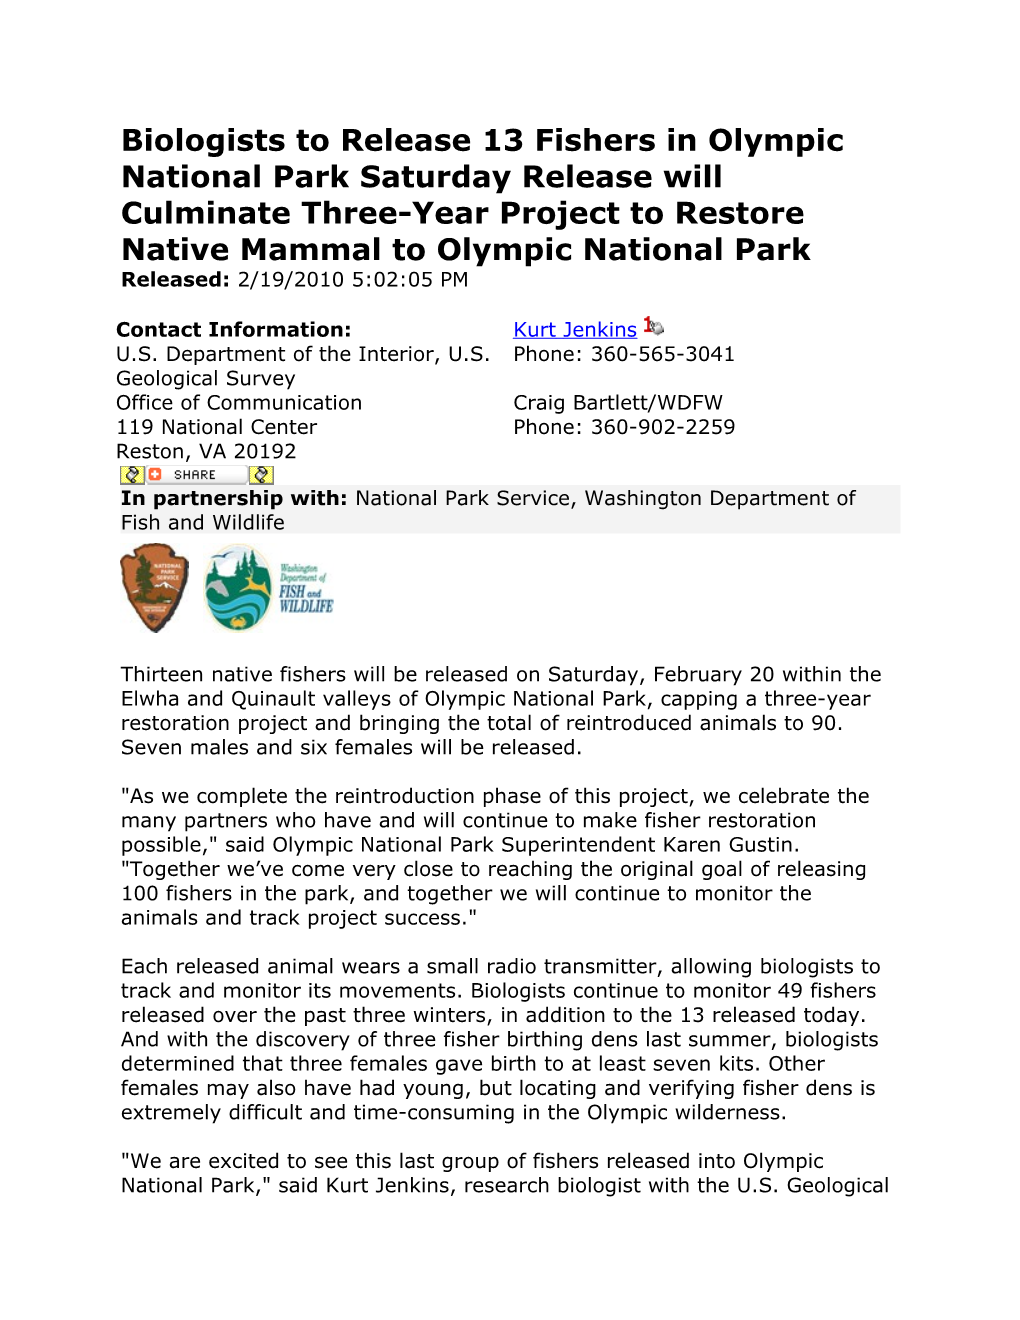 In Partnership With: National Park Service, Washington Department of Fish and Wildlife